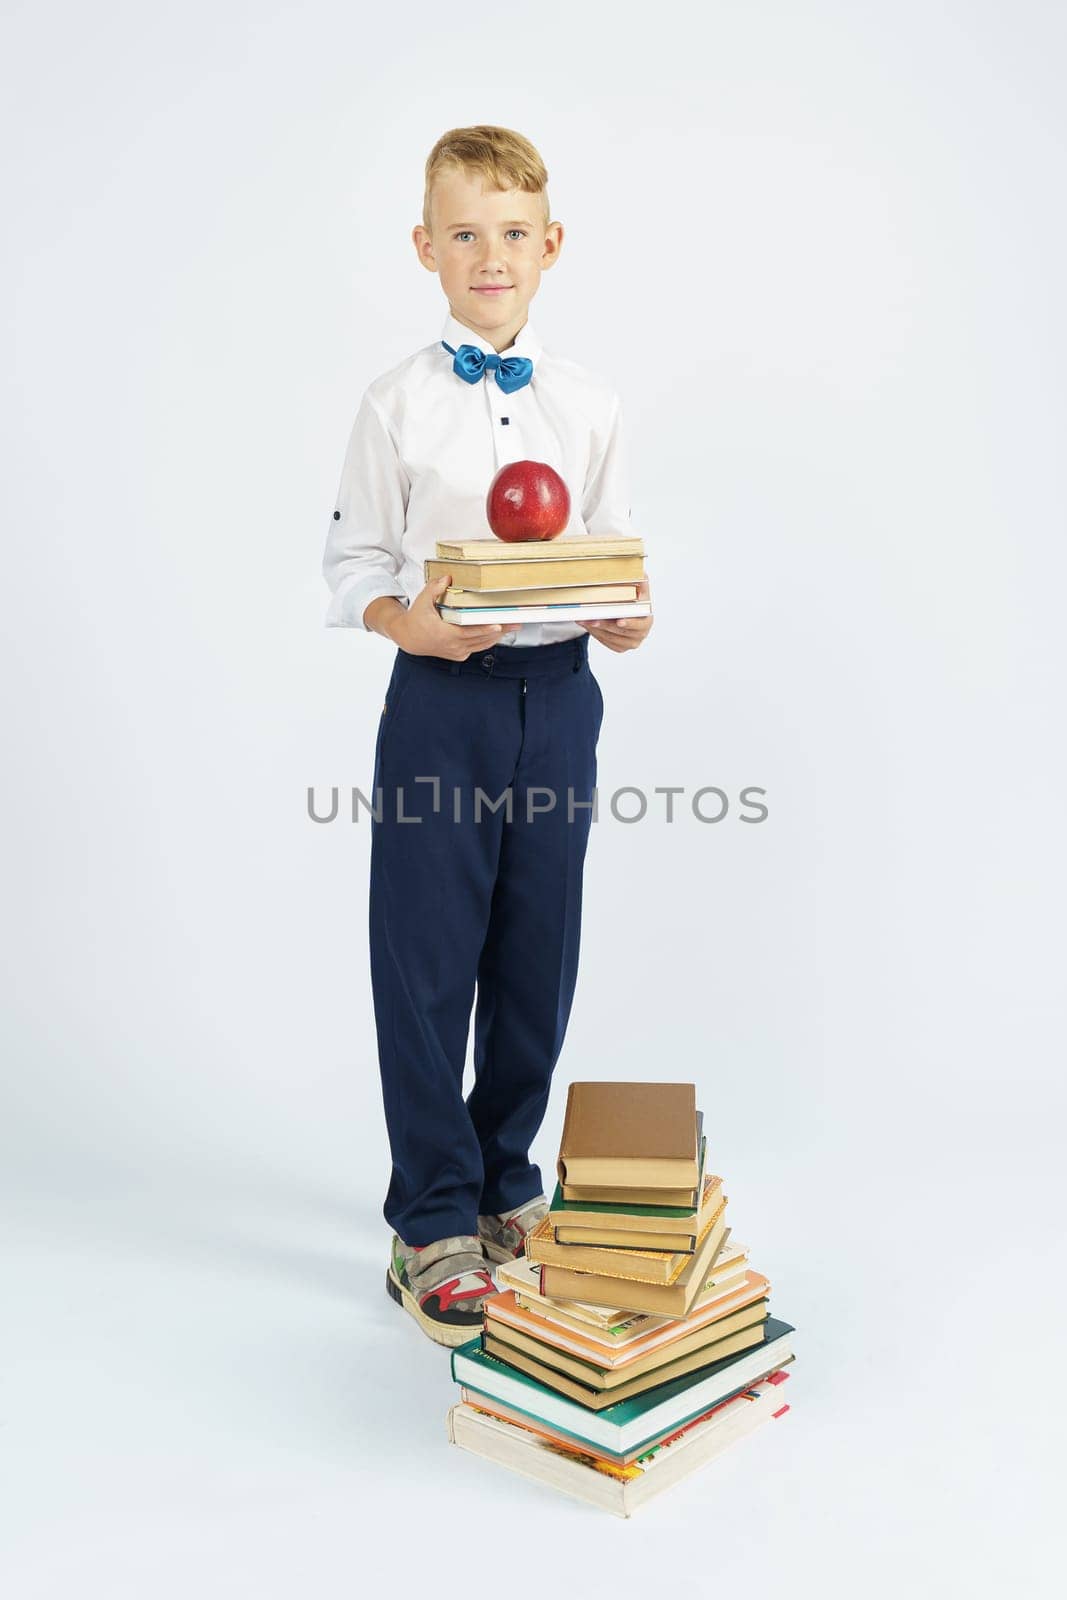 A schoolboy stands near a stack of books, holding books and an apple in his hands. Isolated background. Education concept